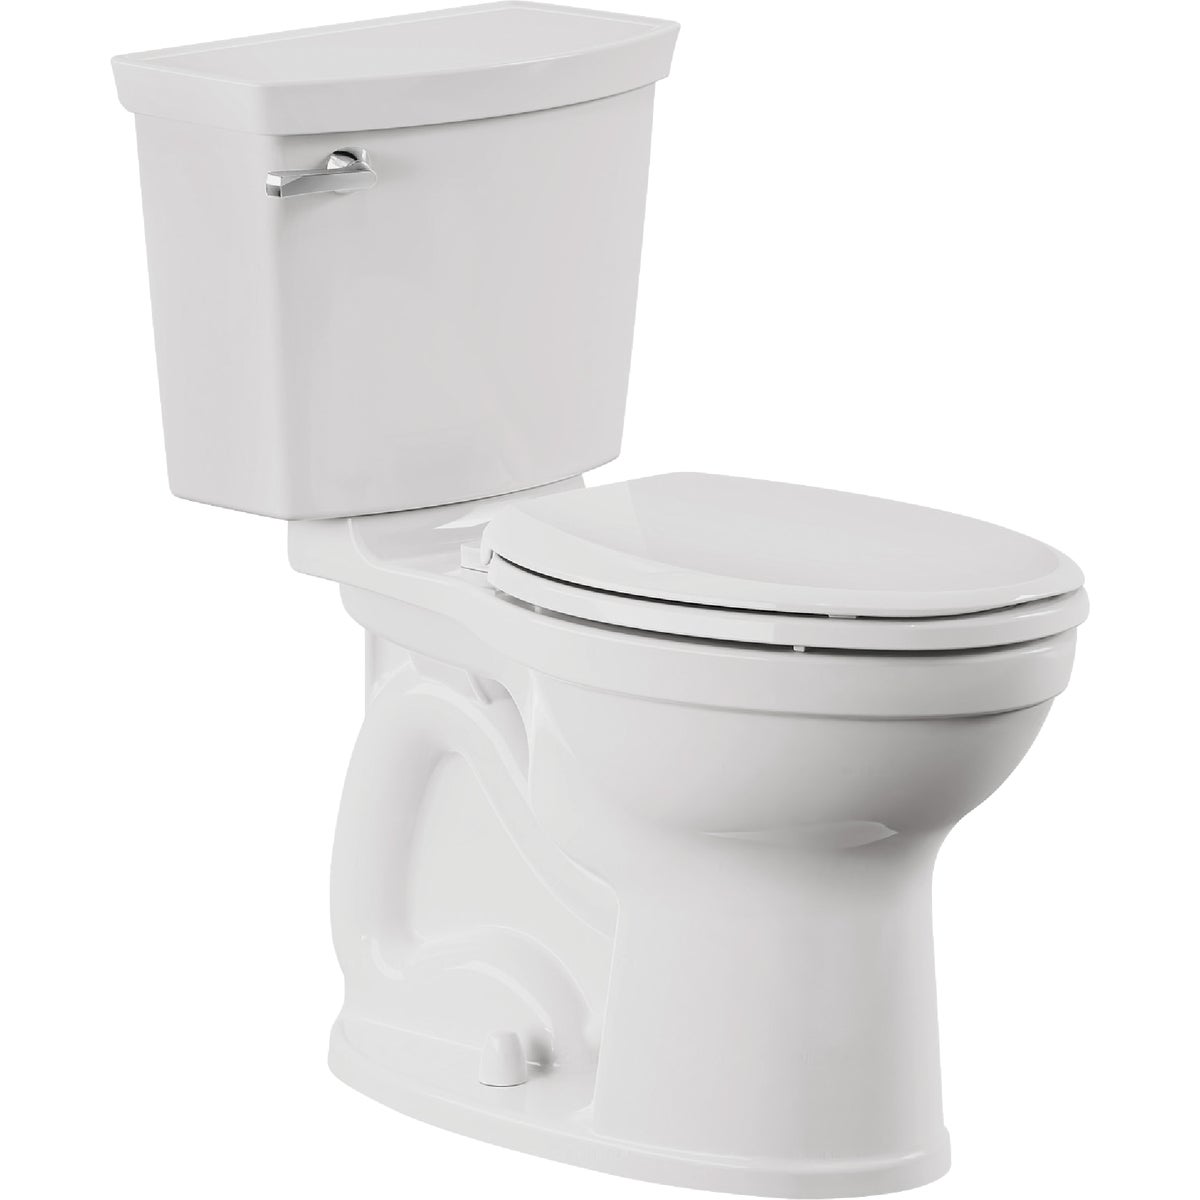 American Standard Champion 4 Right Height White Elongated Bowl 1.28 GPF Toilet